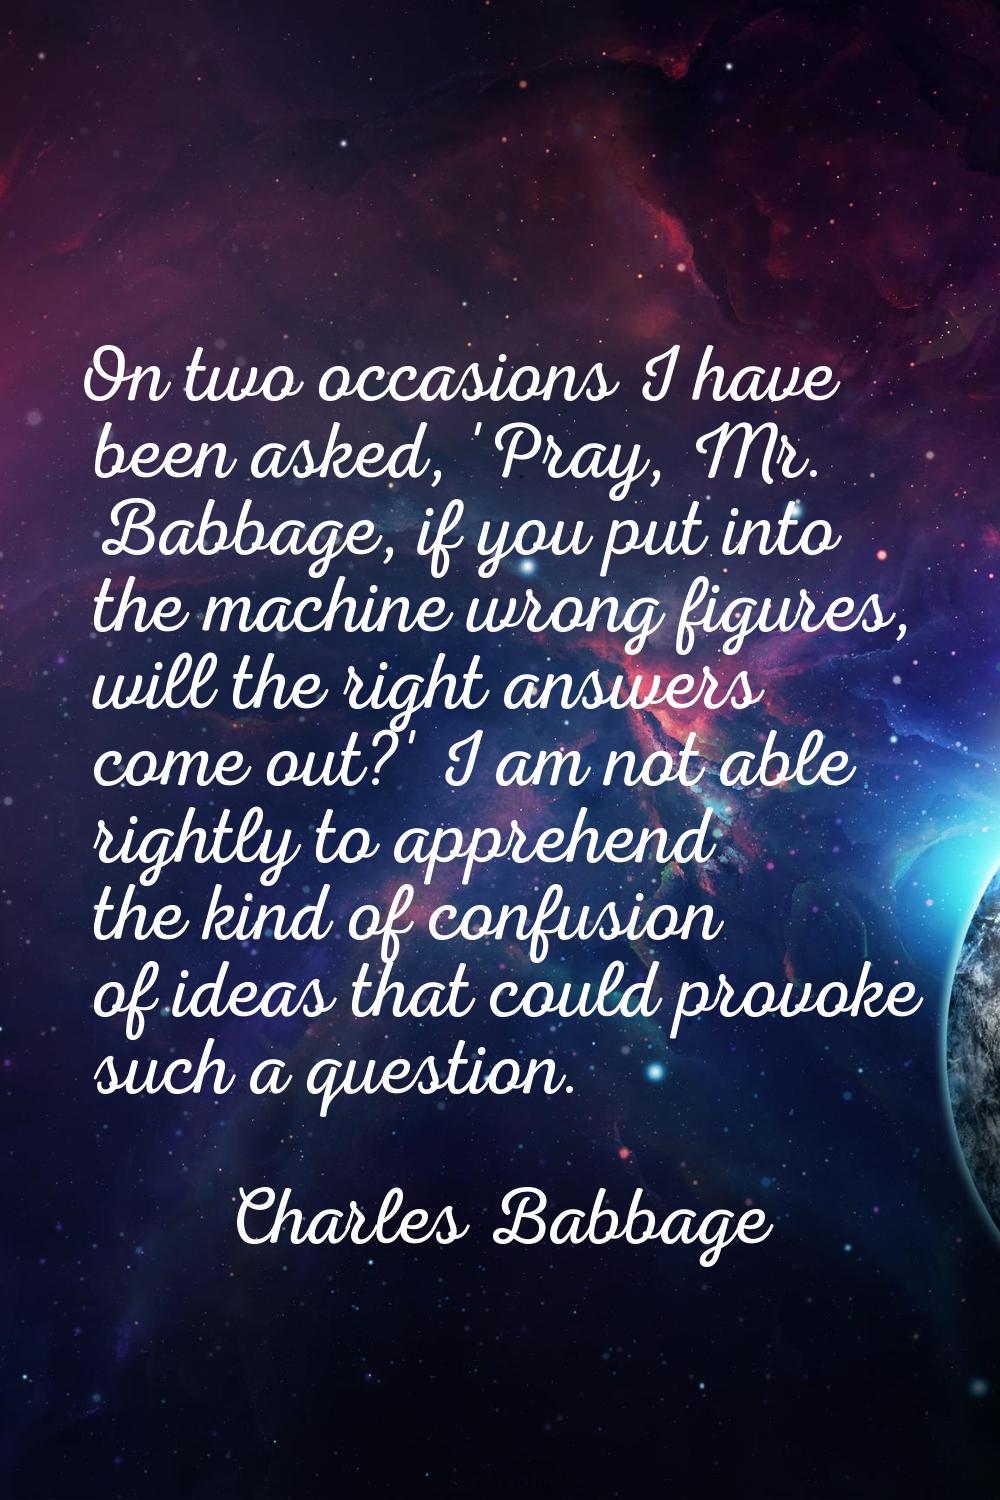 On two occasions I have been asked, 'Pray, Mr. Babbage, if you put into the machine wrong figures, 